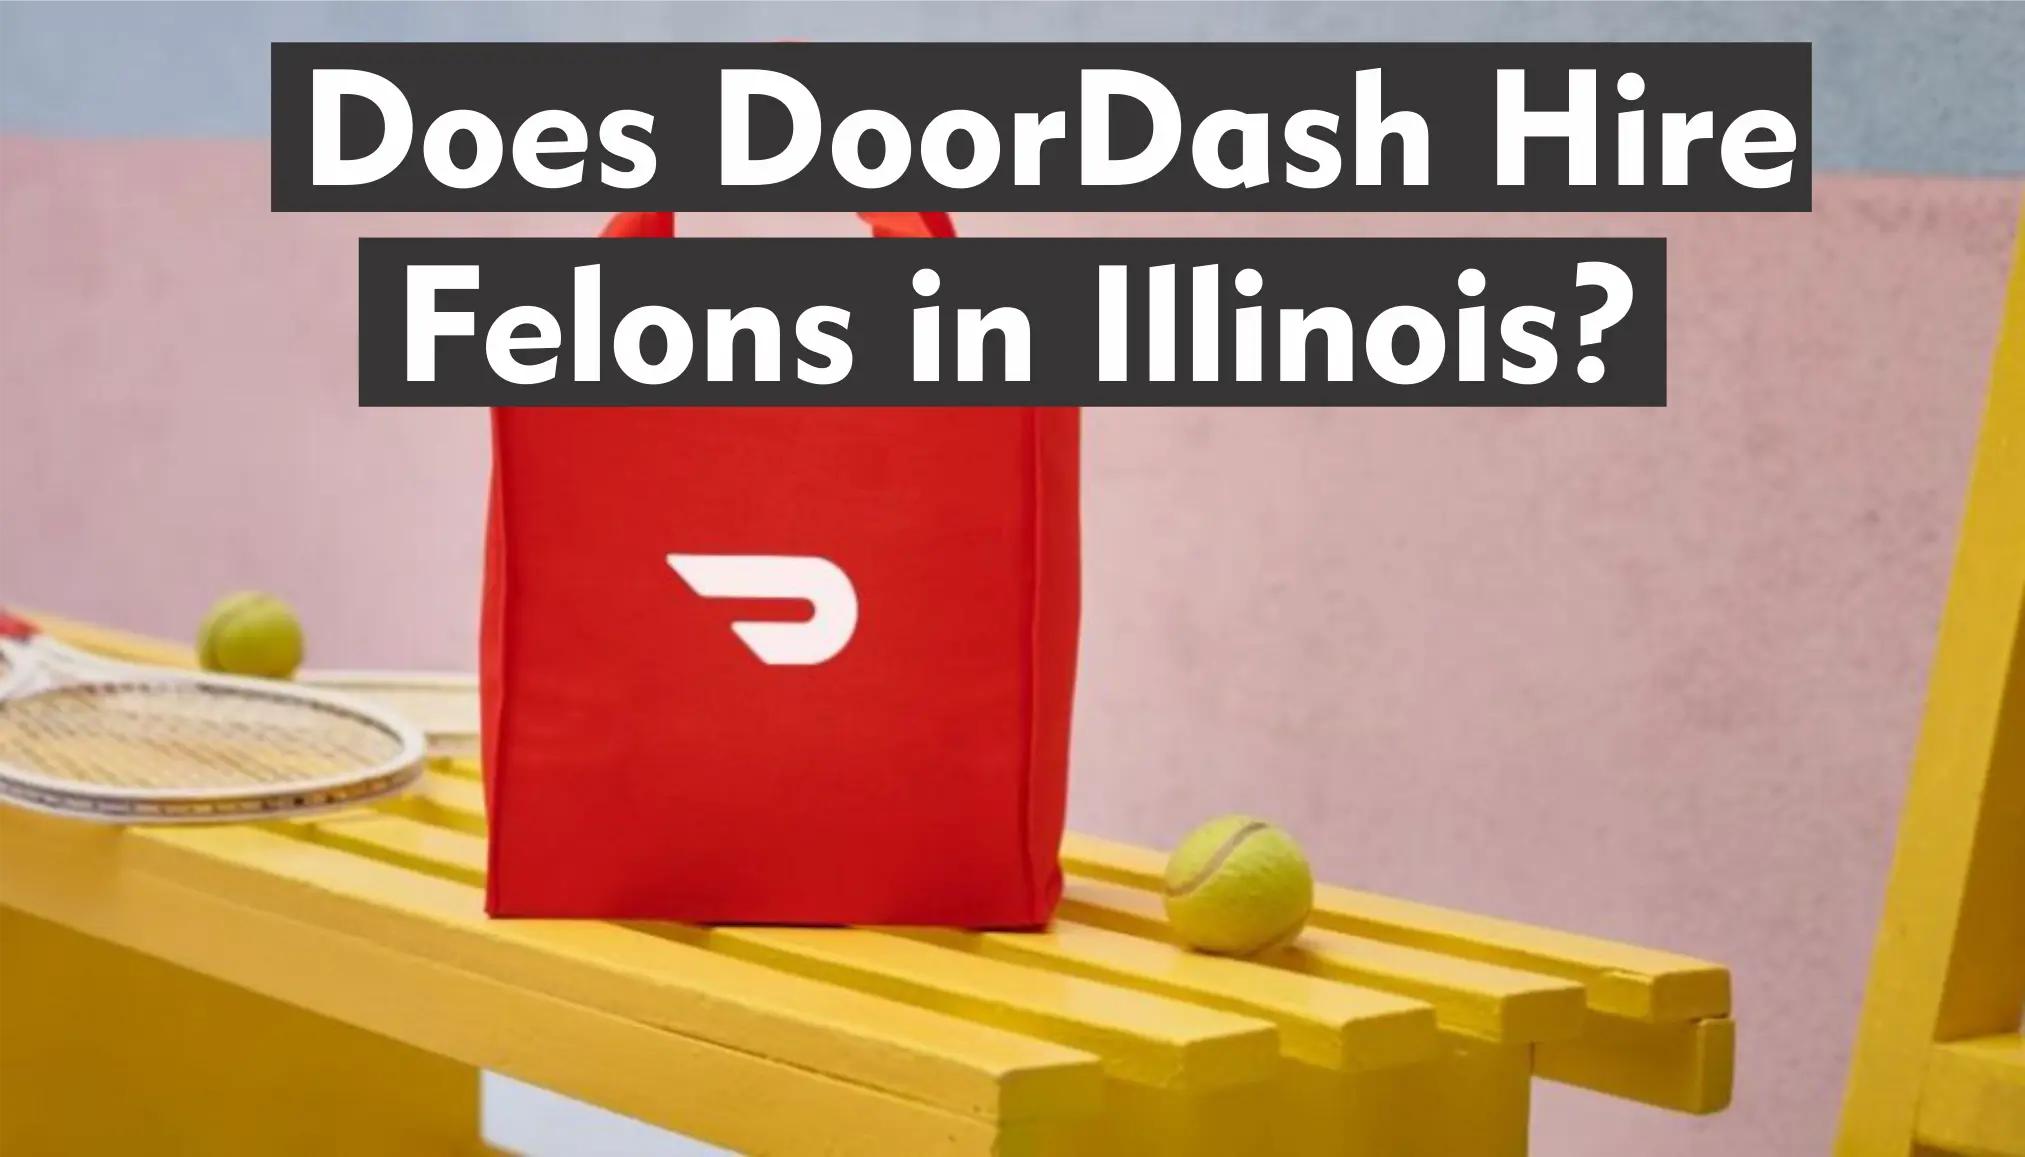 Does DoorDash Hire Felons in Illinois?